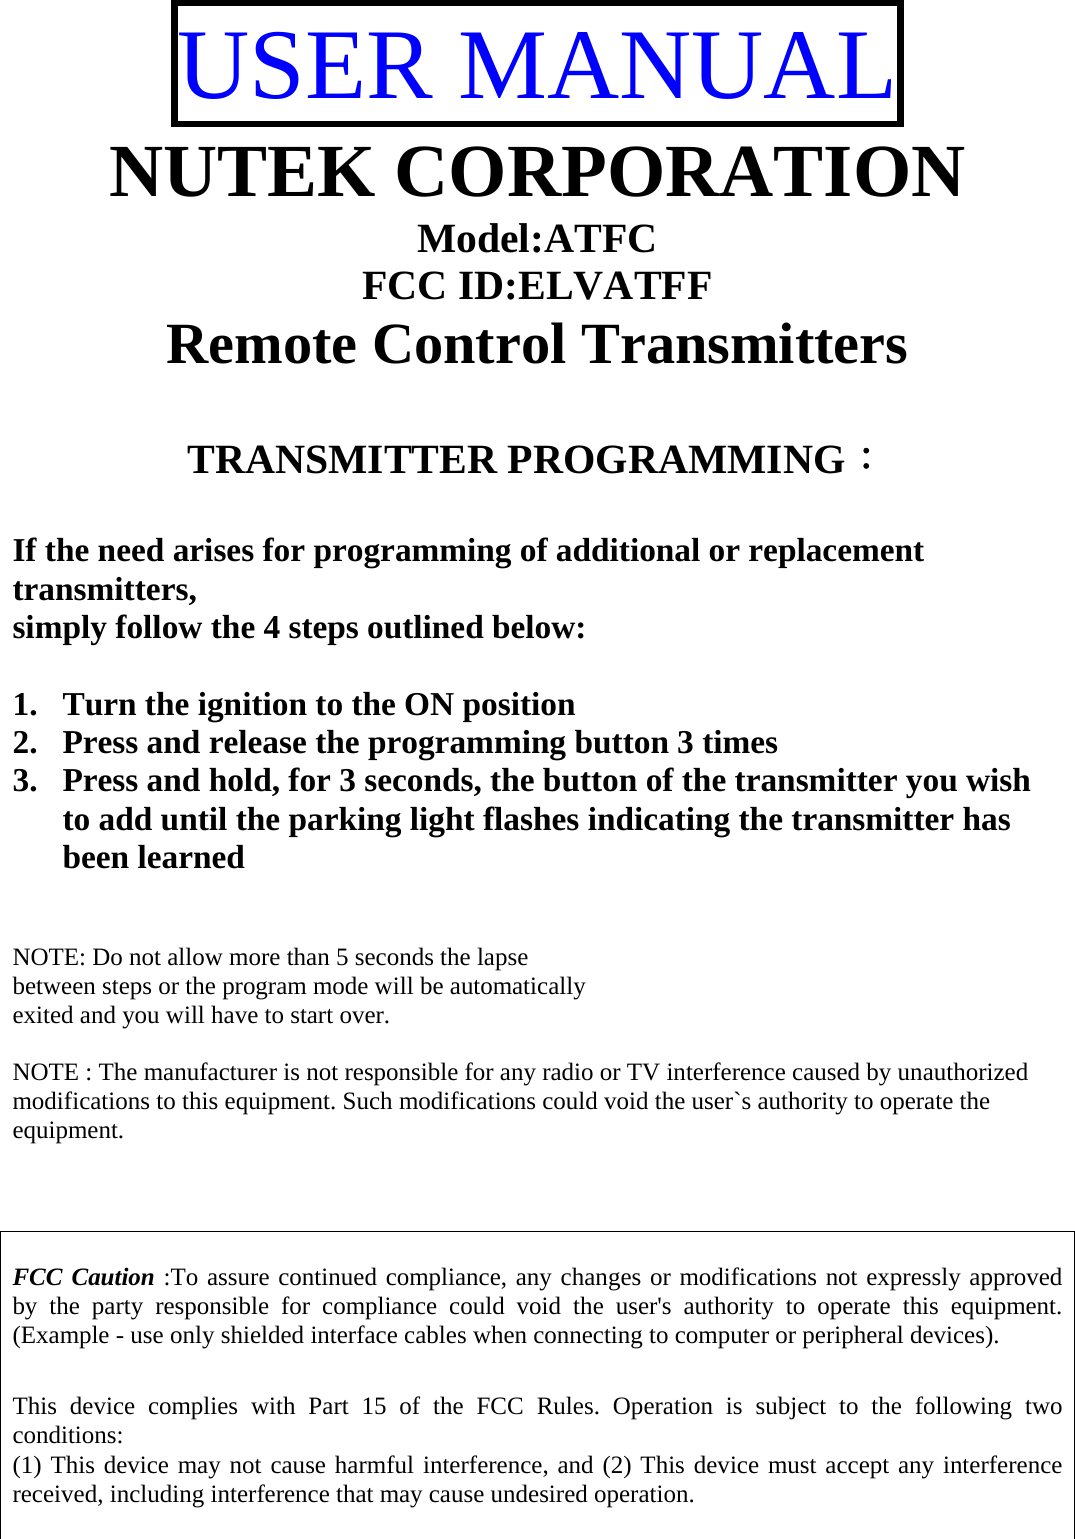 USER MANUAL NUTEK CORPORATION Model:ATFC FCC ID:ELVATFF Remote Control Transmitters   TRANSMITTER PROGRAMMING：  If the need arises for programming of additional or replacement transmitters, simply follow the 4 steps outlined below:  1. Turn the ignition to the ON position  2. Press and release the programming button 3 times  3. Press and hold, for 3 seconds, the button of the transmitter you wish to add until the parking light flashes indicating the transmitter has been learned   NOTE: Do not allow more than 5 seconds the lapse  between steps or the program mode will be automatically  exited and you will have to start over.  NOTE : The manufacturer is not responsible for any radio or TV interference caused by unauthorized modifications to this equipment. Such modifications could void the user`s authority to operate the equipment.    FCC Caution :To assure continued compliance, any changes or modifications not expressly approved by the party responsible for compliance could void the user&apos;s authority to operate this equipment. (Example - use only shielded interface cables when connecting to computer or peripheral devices).  This device complies with Part 15 of the FCC Rules. Operation is subject to the following two conditions: (1) This device may not cause harmful interference, and (2) This device must accept any interference received, including interference that may cause undesired operation.  